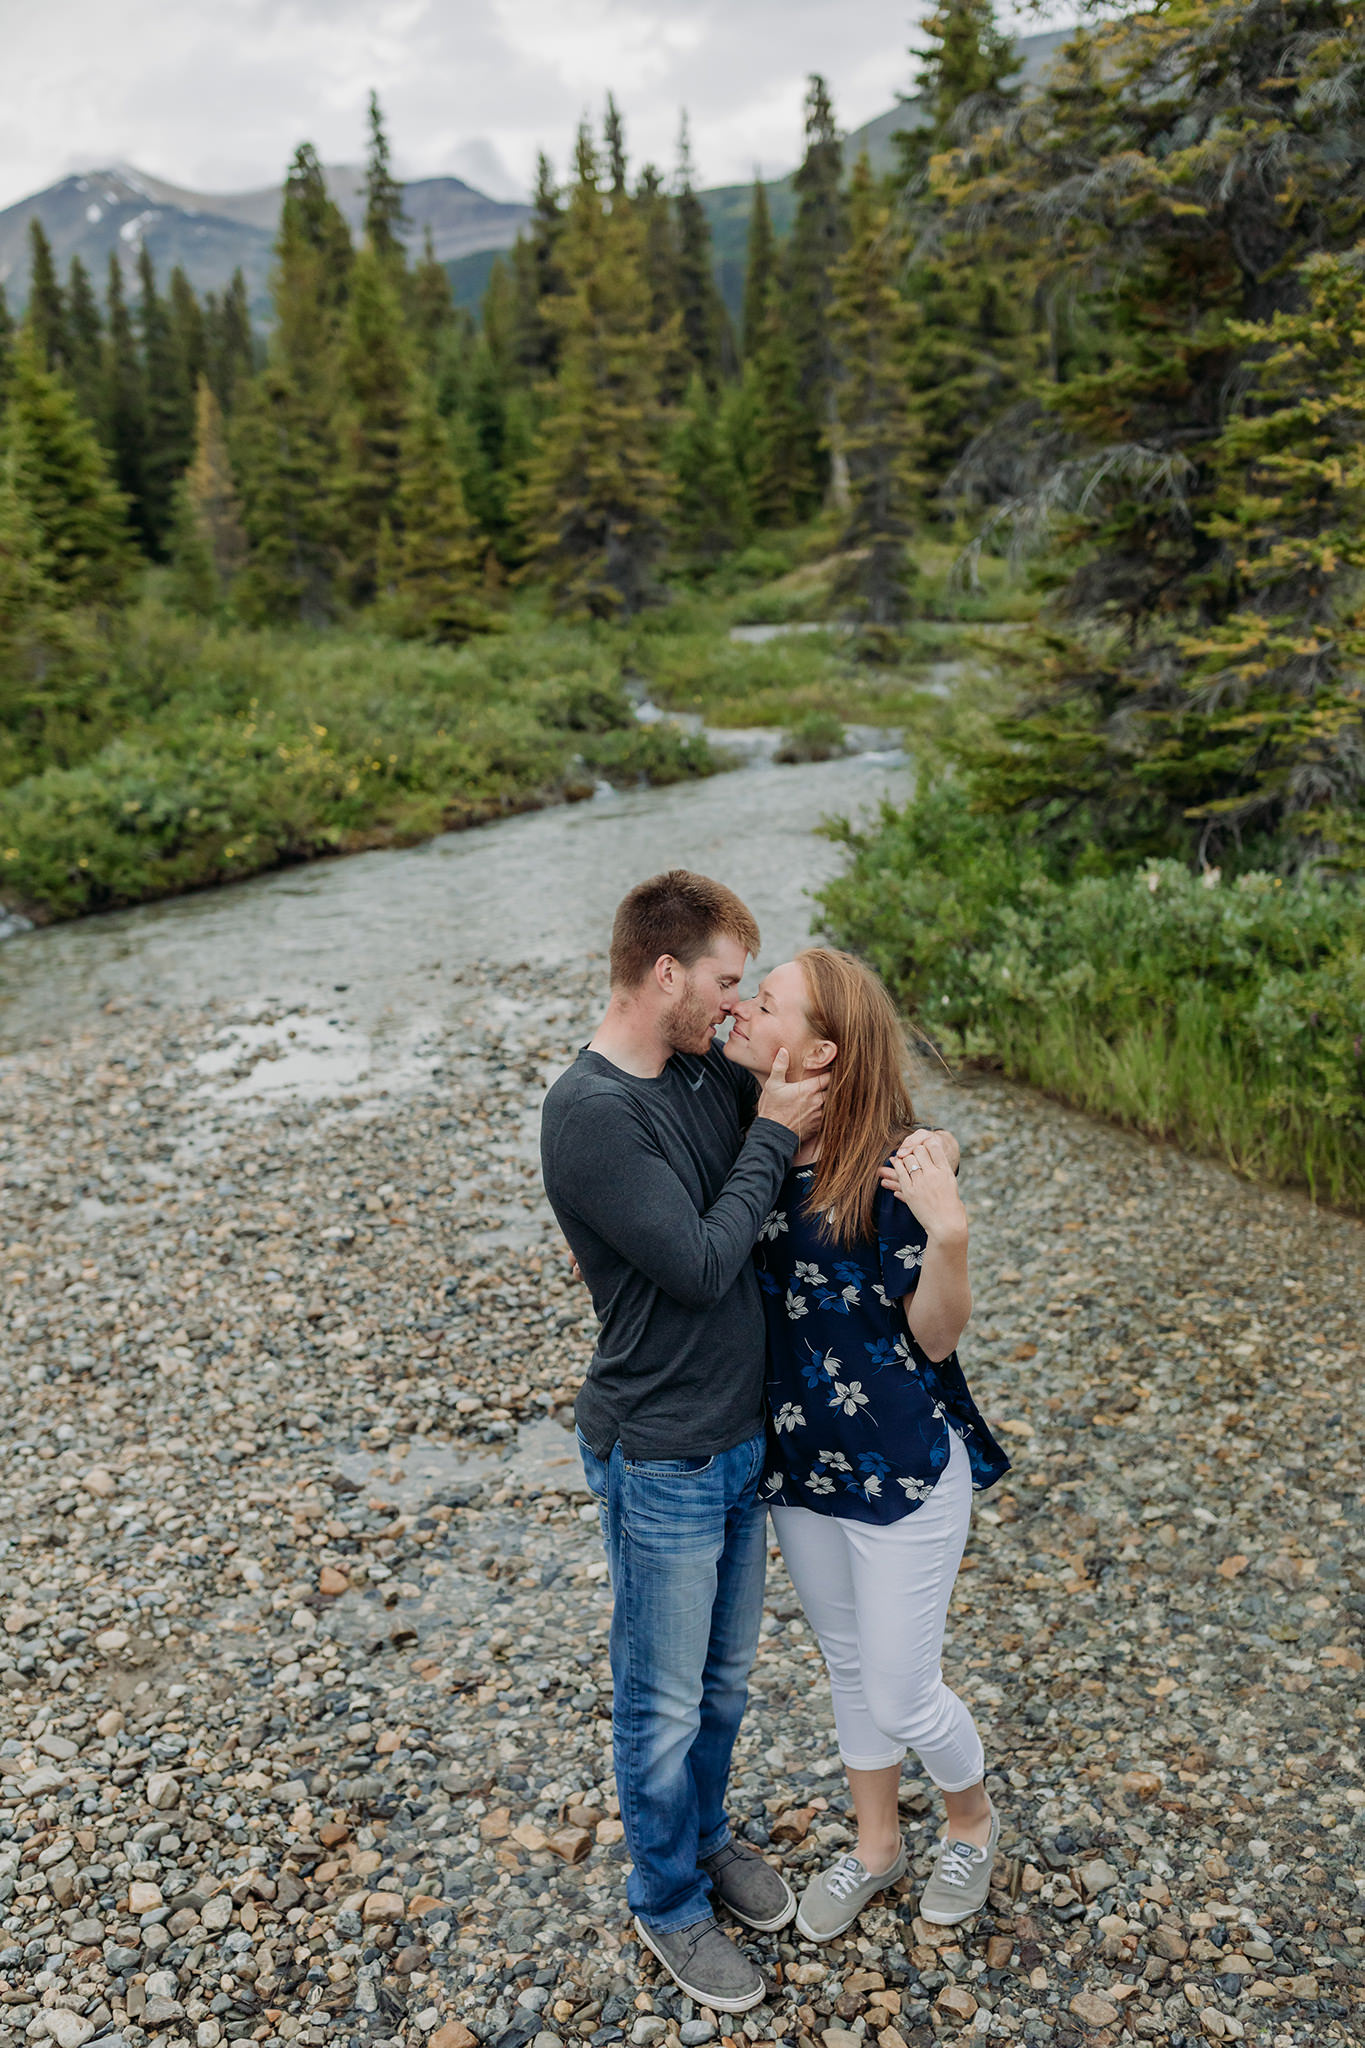 Bow Lake summer couples photography session along Icefields Parkway in Banff National Park photographed by local elopement photographer ENV Photography